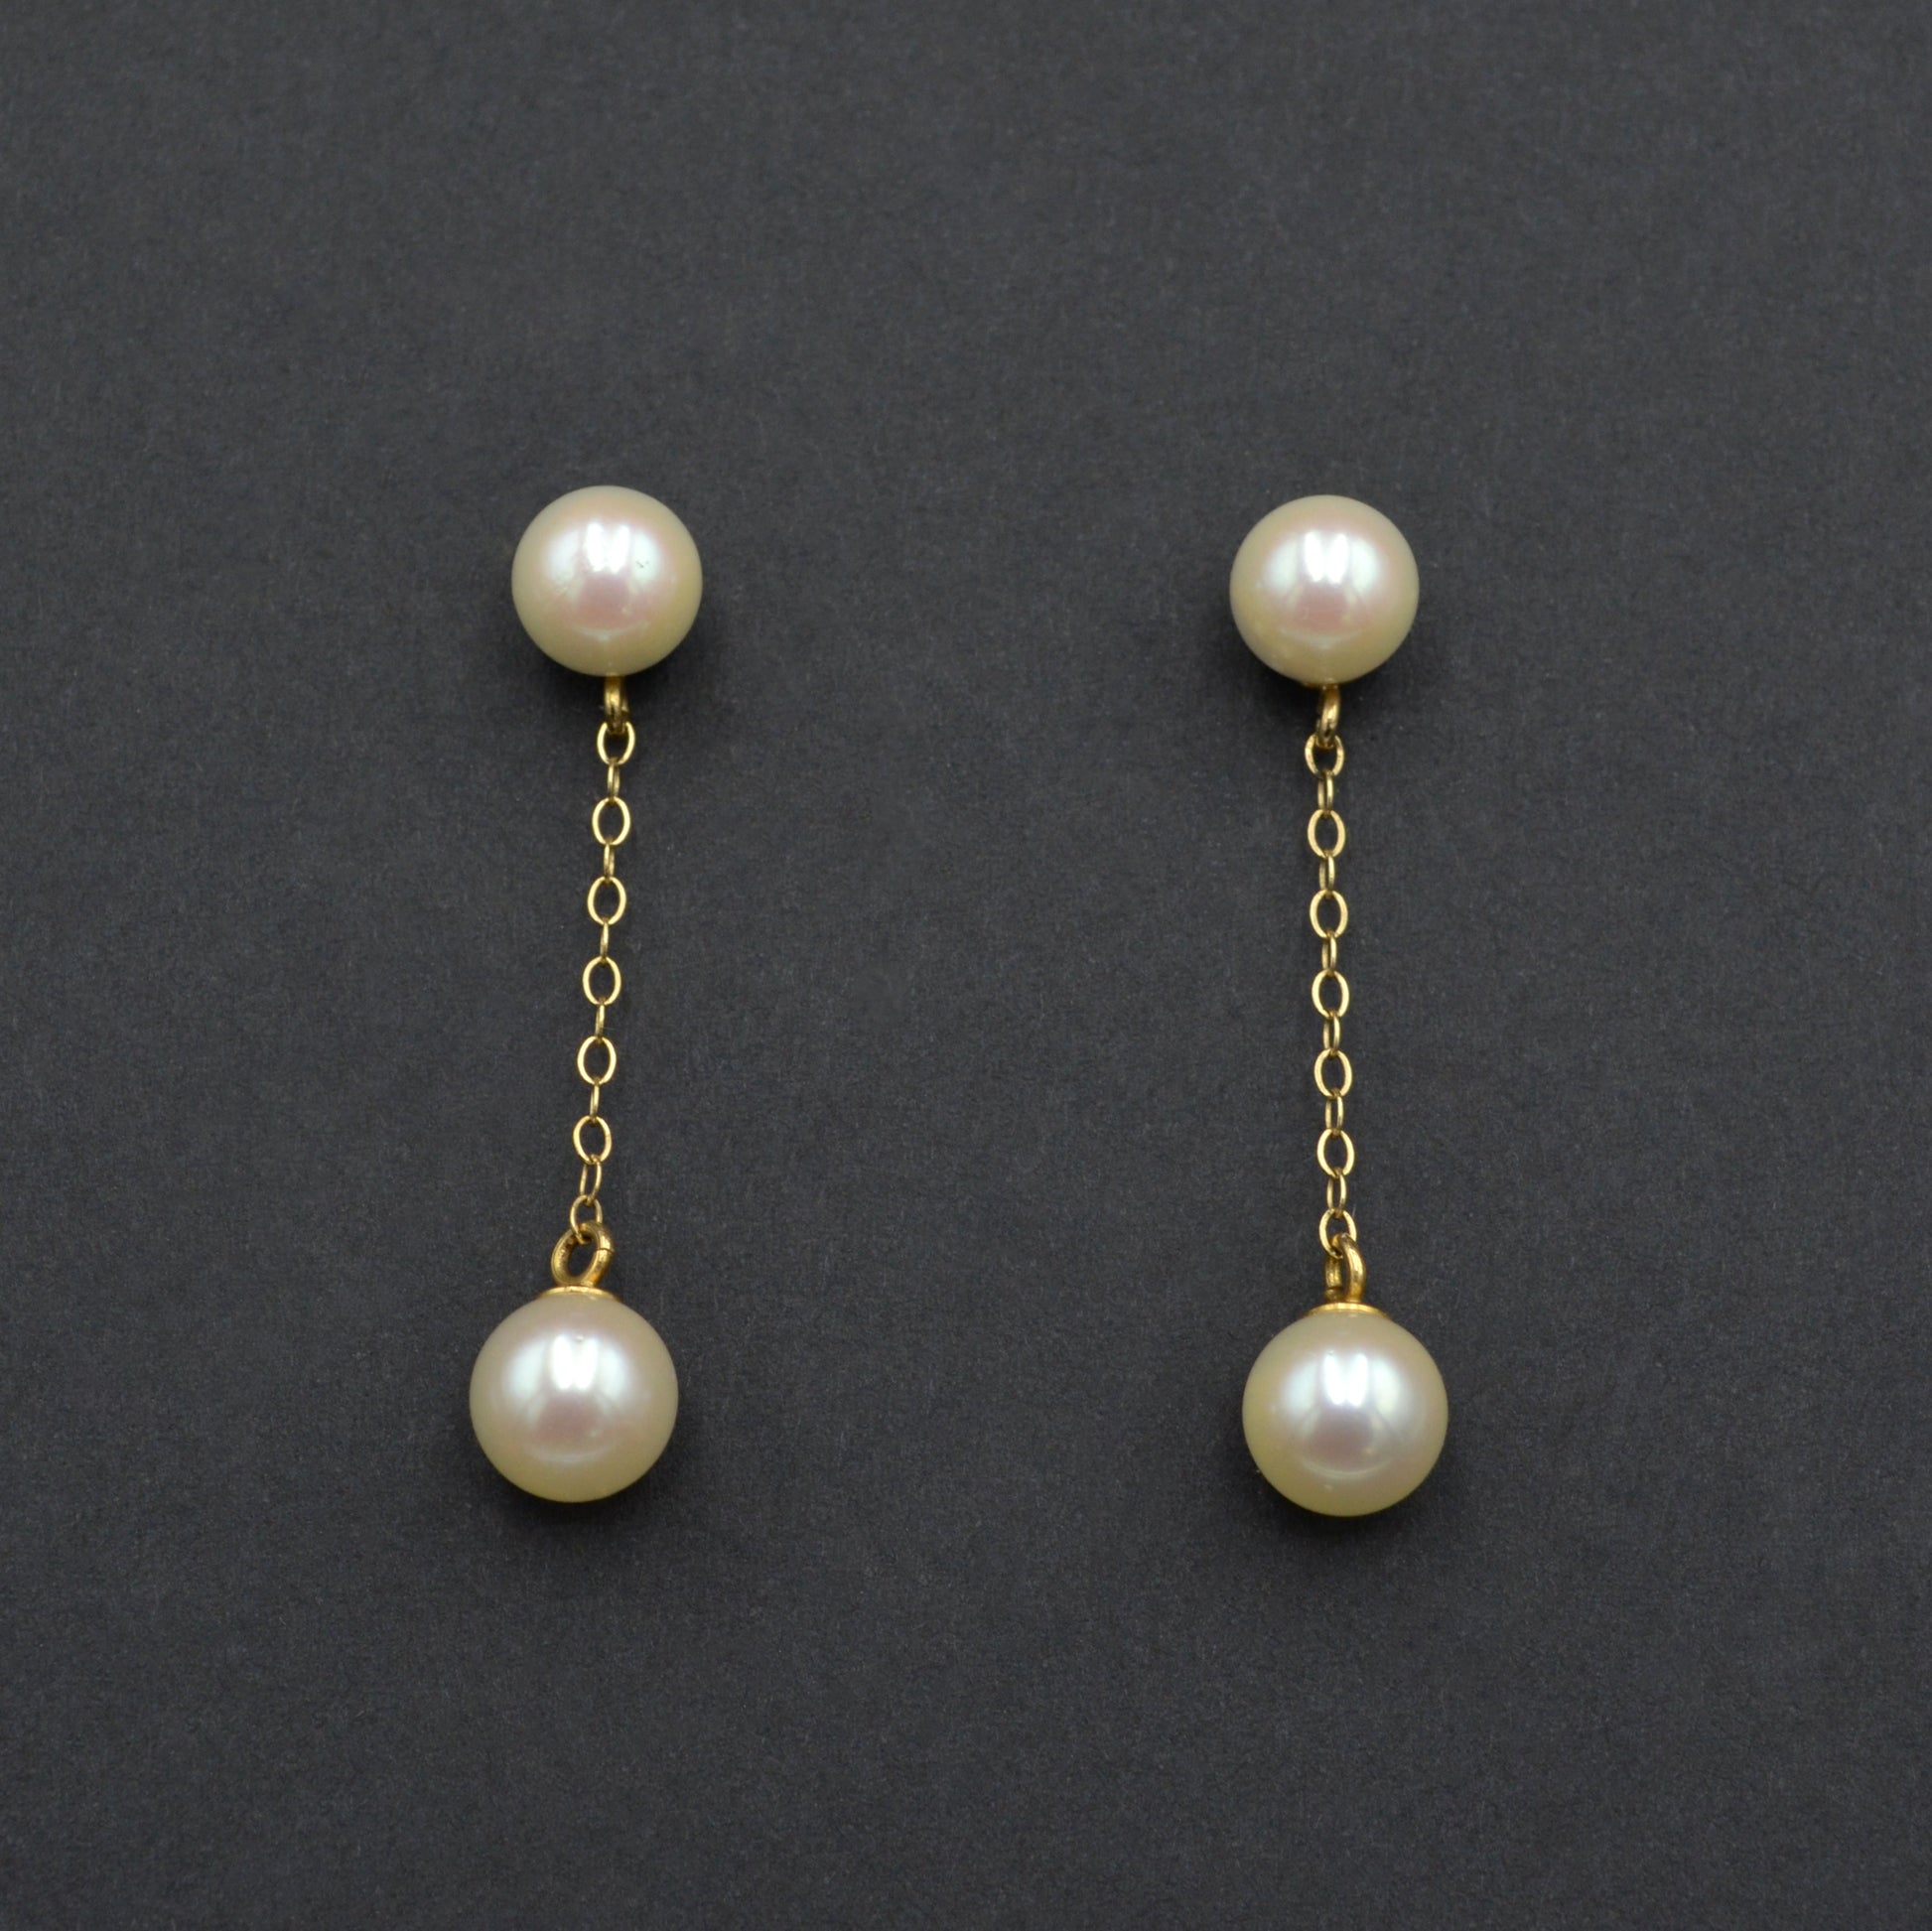 Double Pearl and Chain Dangle Drop Earrings in 14k Gold 